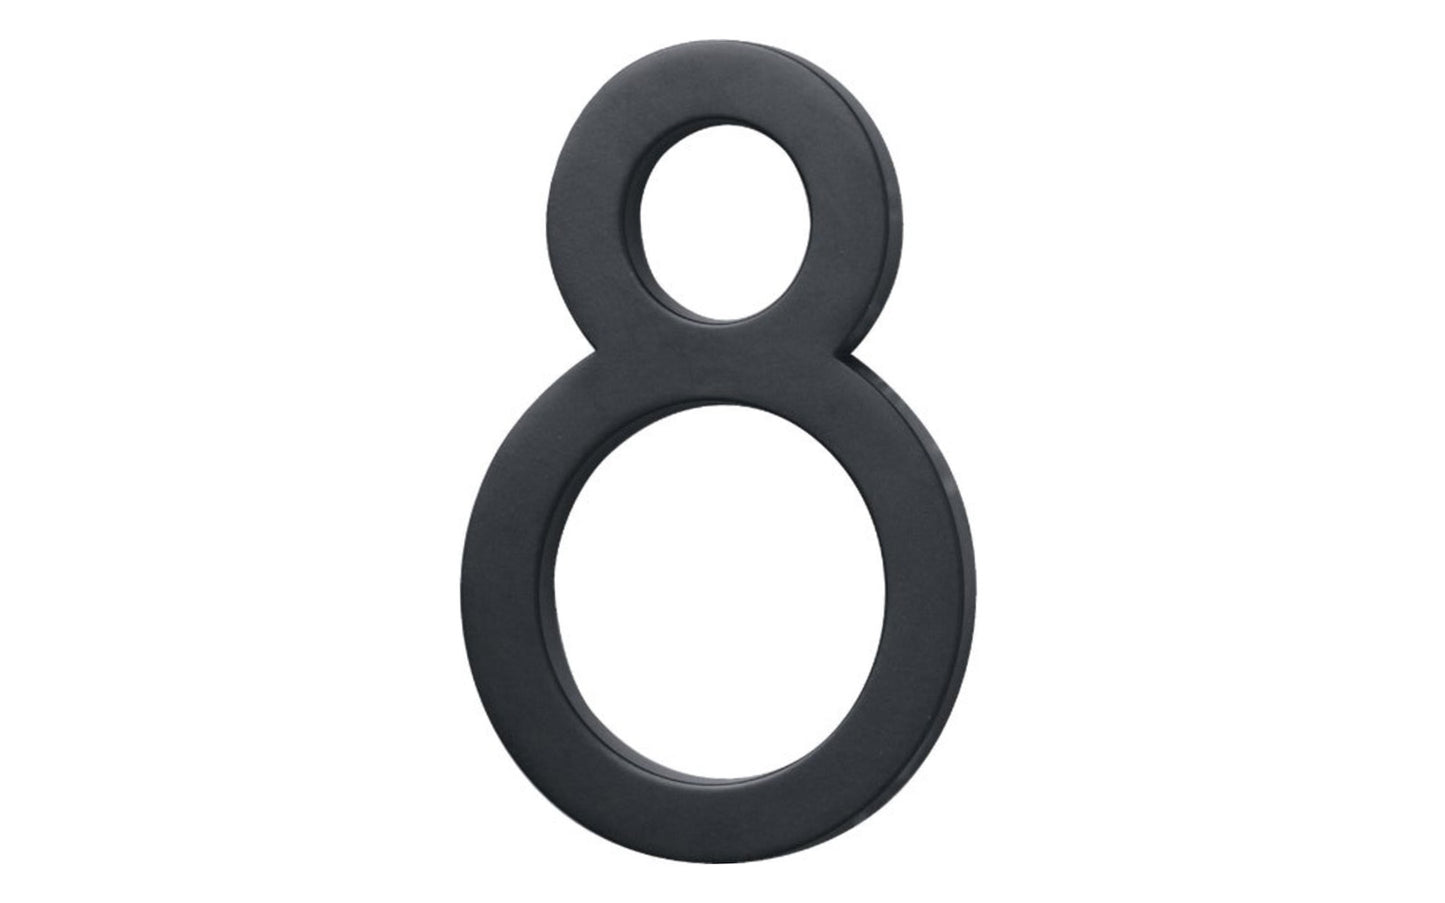 Number Eight House Number in a classy architectural style design. Satin black finish. 6" size house number with 1/2" material thickness. Can be installed flush mount or floating mount (elevated from wall for a shadow effect). #8 House Number. Hy-Ko Model No. FM-6/8. 029069310783